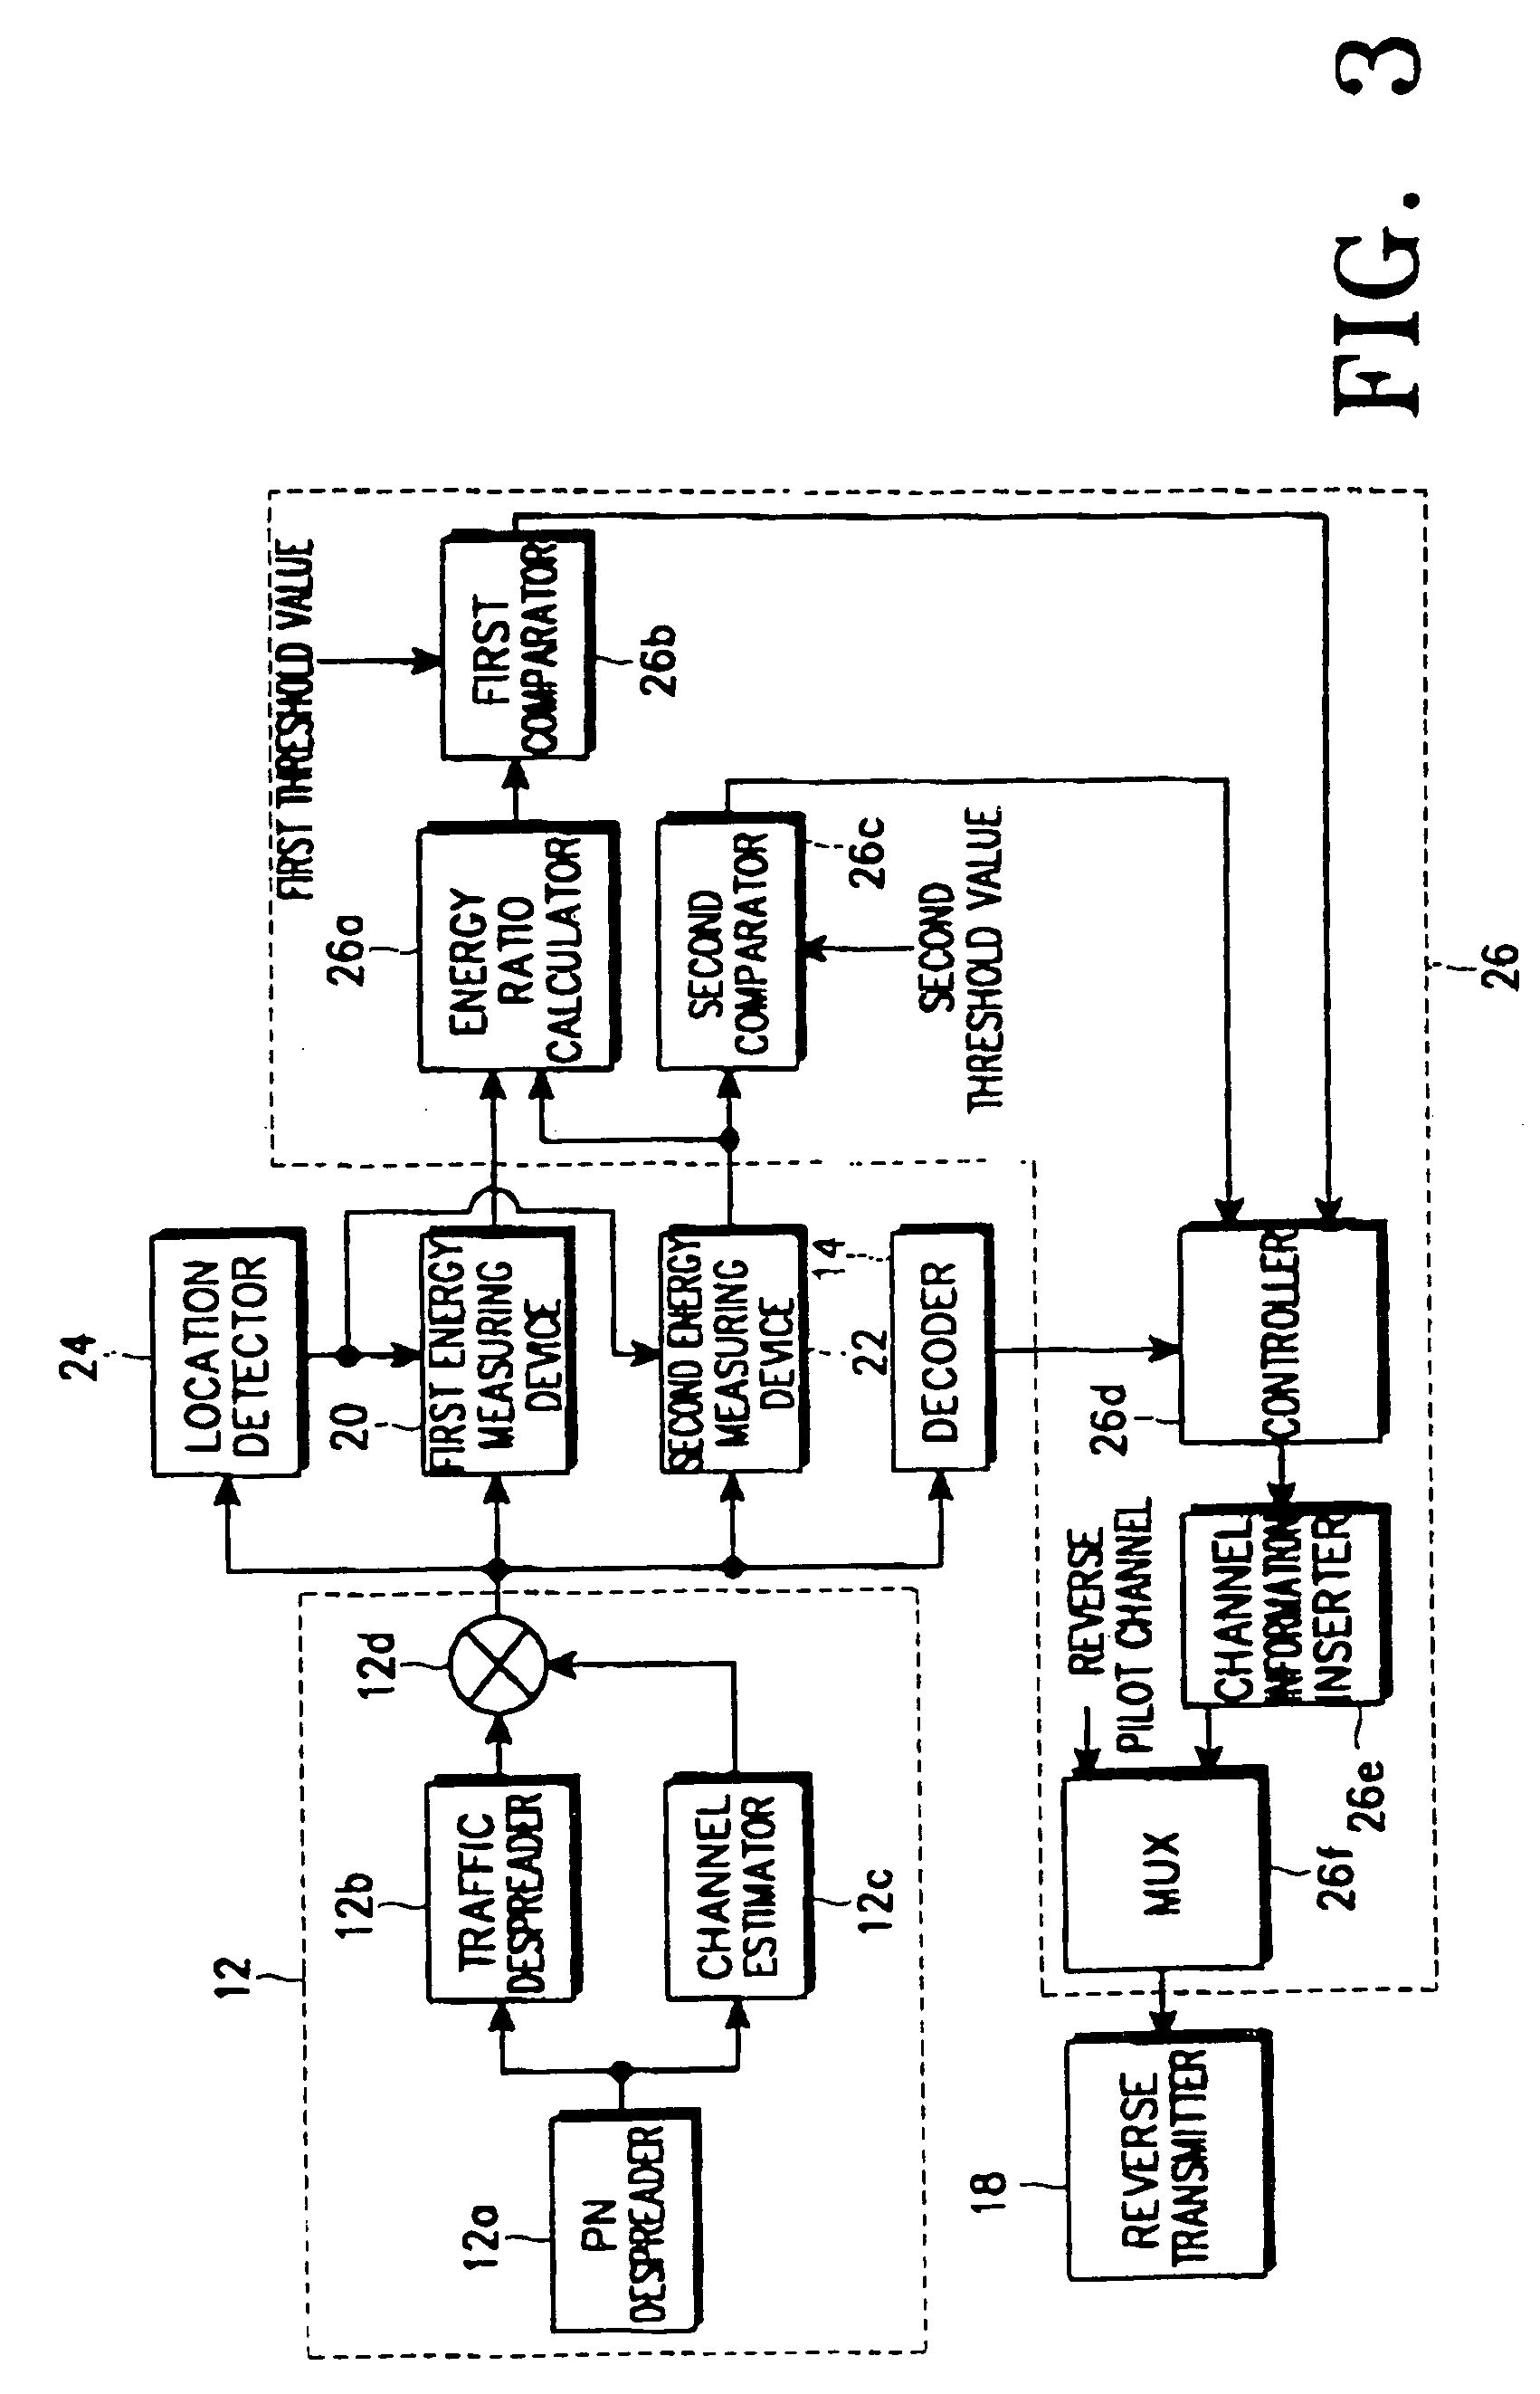 Apparatus and method of controlling forward link power when in discontinuous transmission mode in a mobile communication system